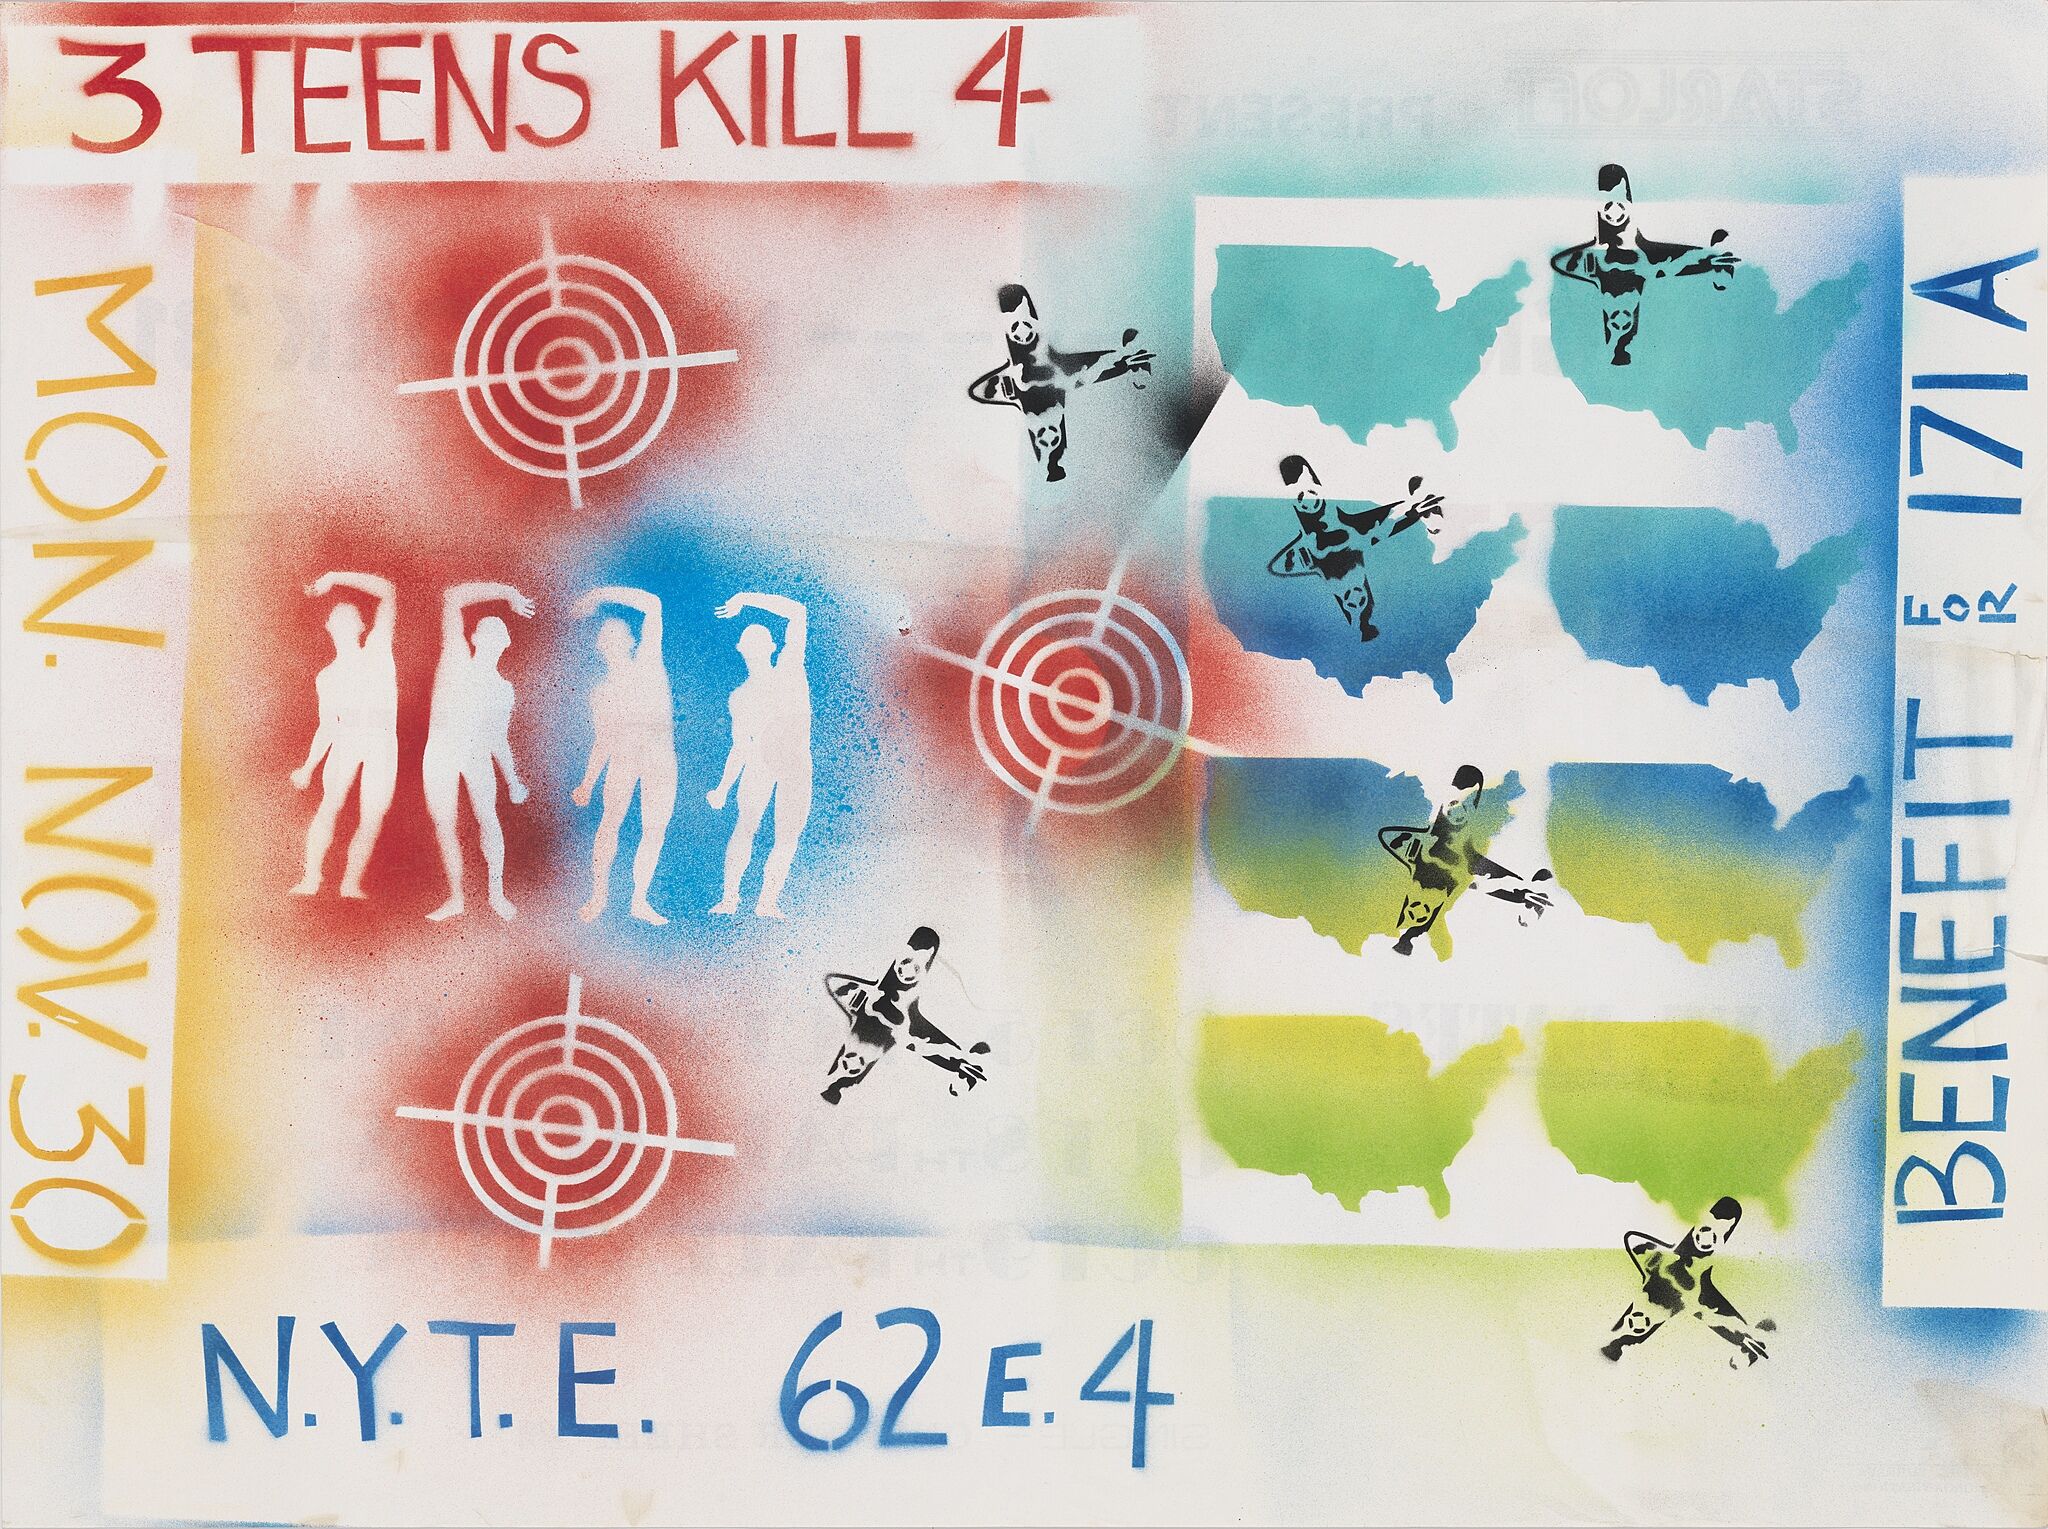 Spray paint print of human silhouettes, planes and shooting targets. 